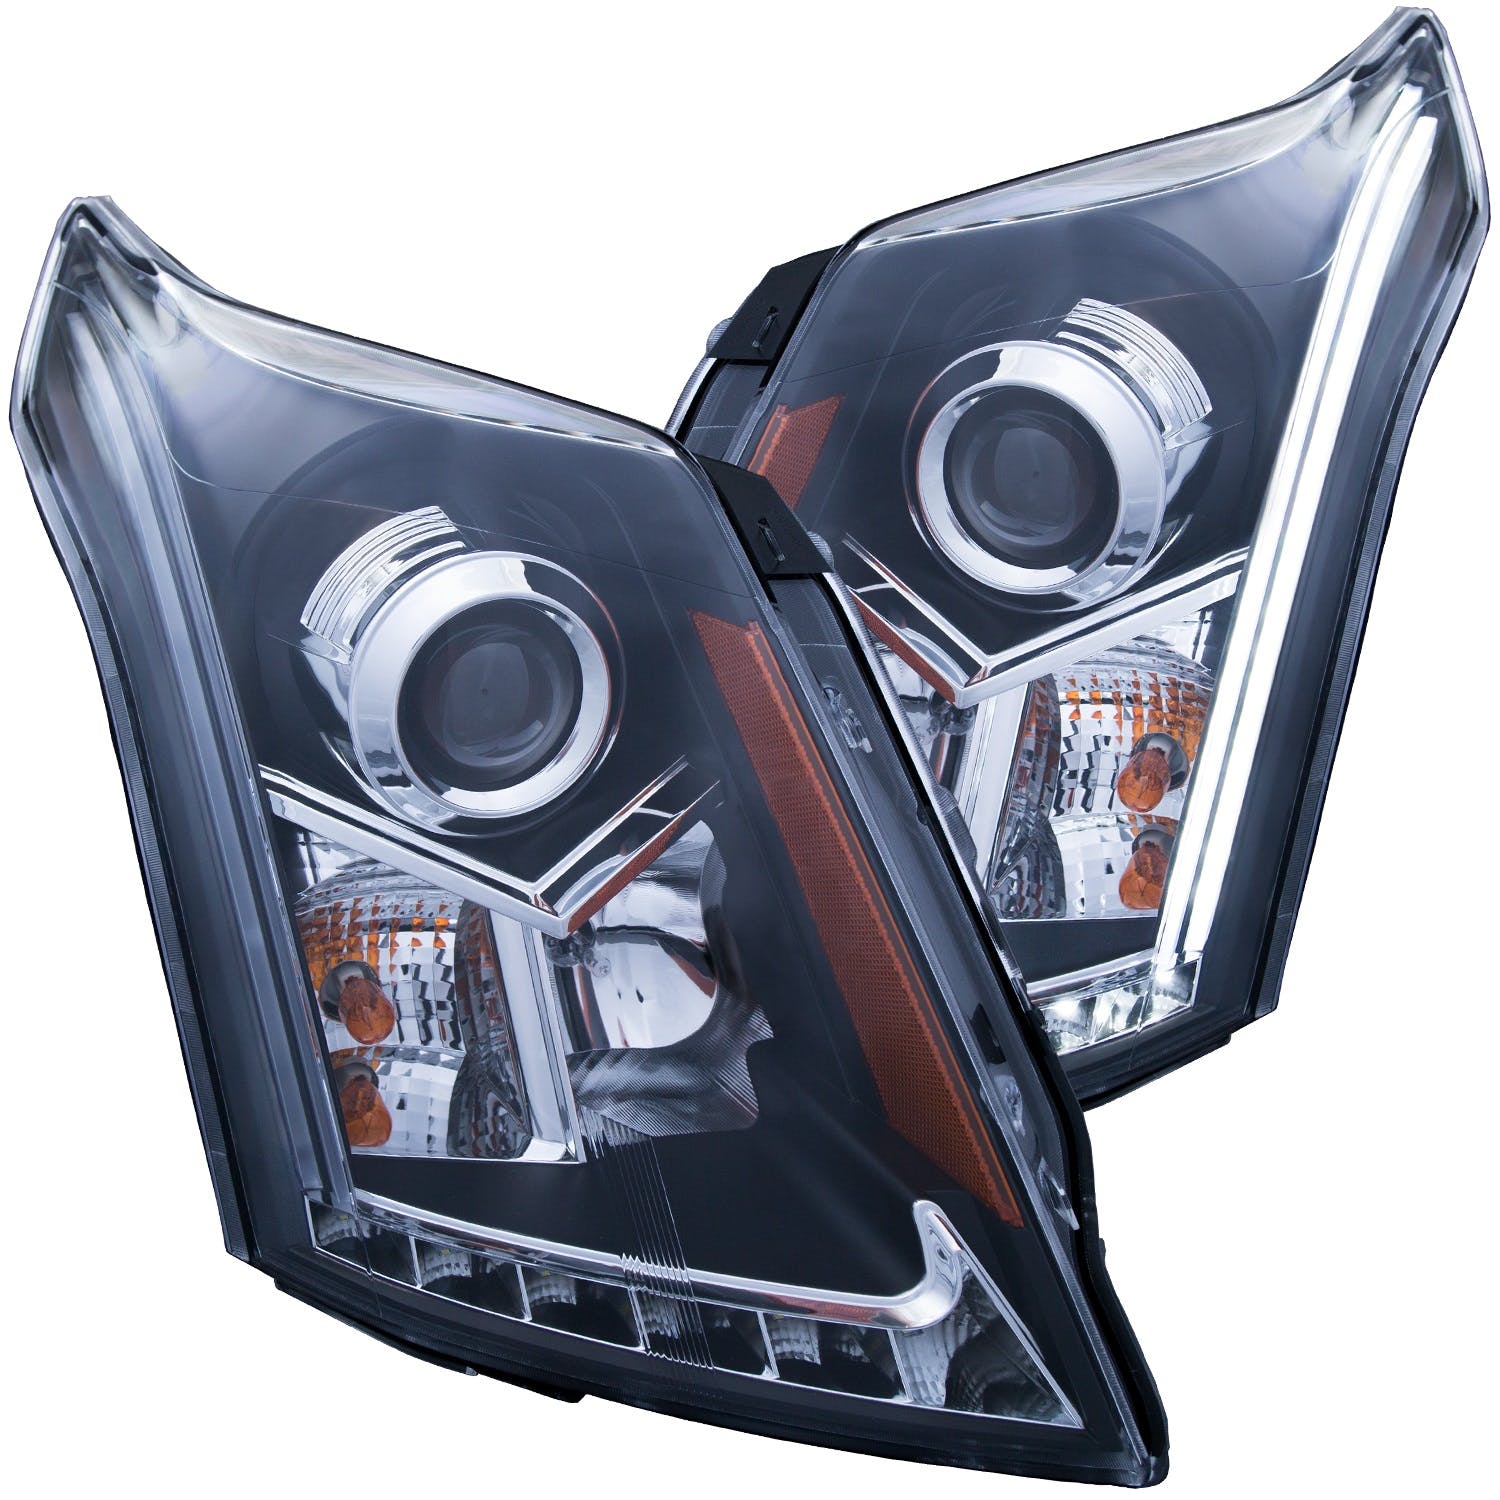 AnzoUSA 111308 Projector Headlights with Plank Style Design Black